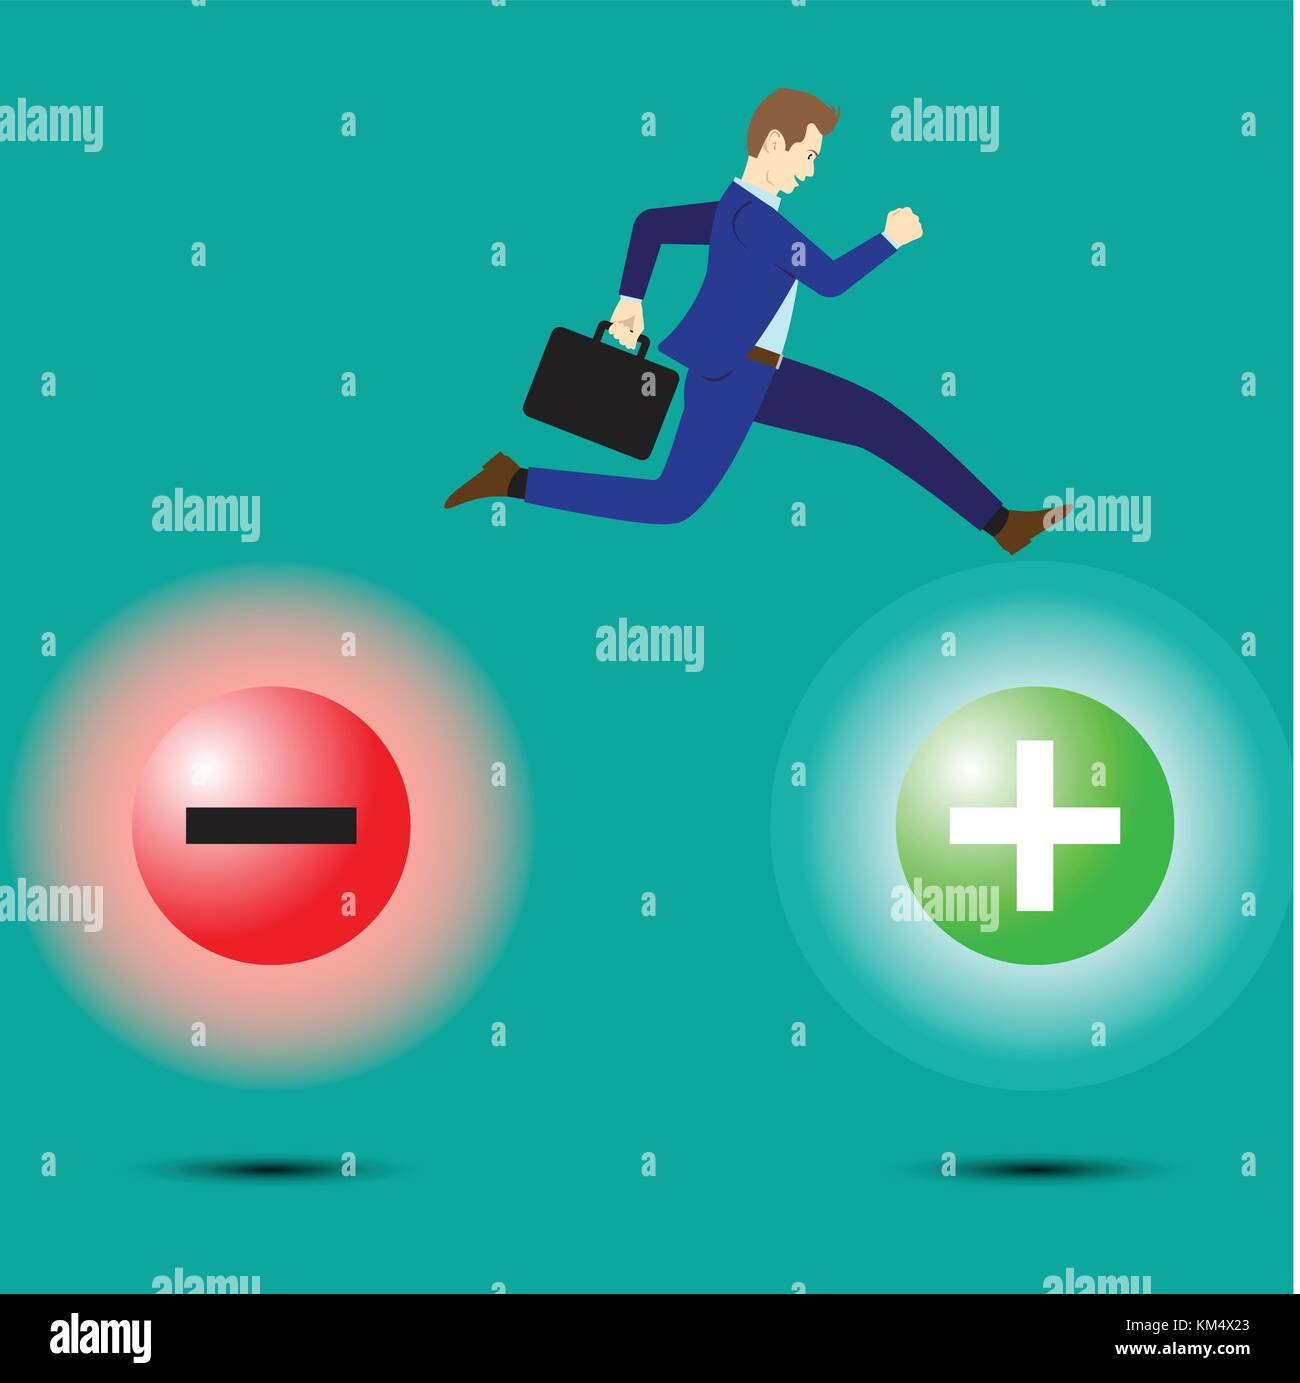 Business Concept As A Businessman Is Highly Jumping Up From Negativity To Positivity. It Means Leaving From Pessimistic Attitude To Optimistic One. Stock Vector